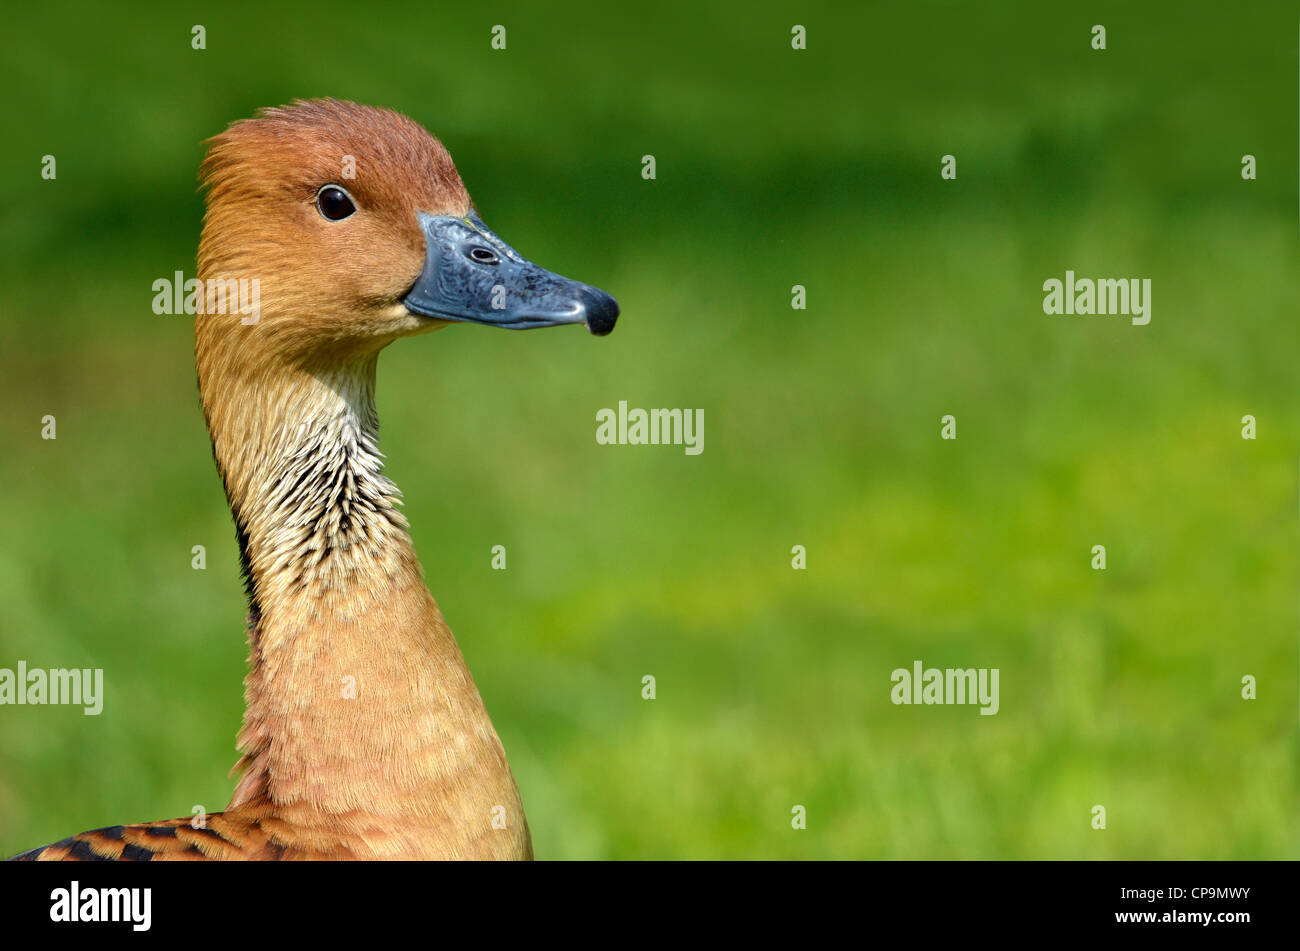 Portrait of Fulvous Whistling Duck (Dendrocygna bicolor) on green background Stock Photo